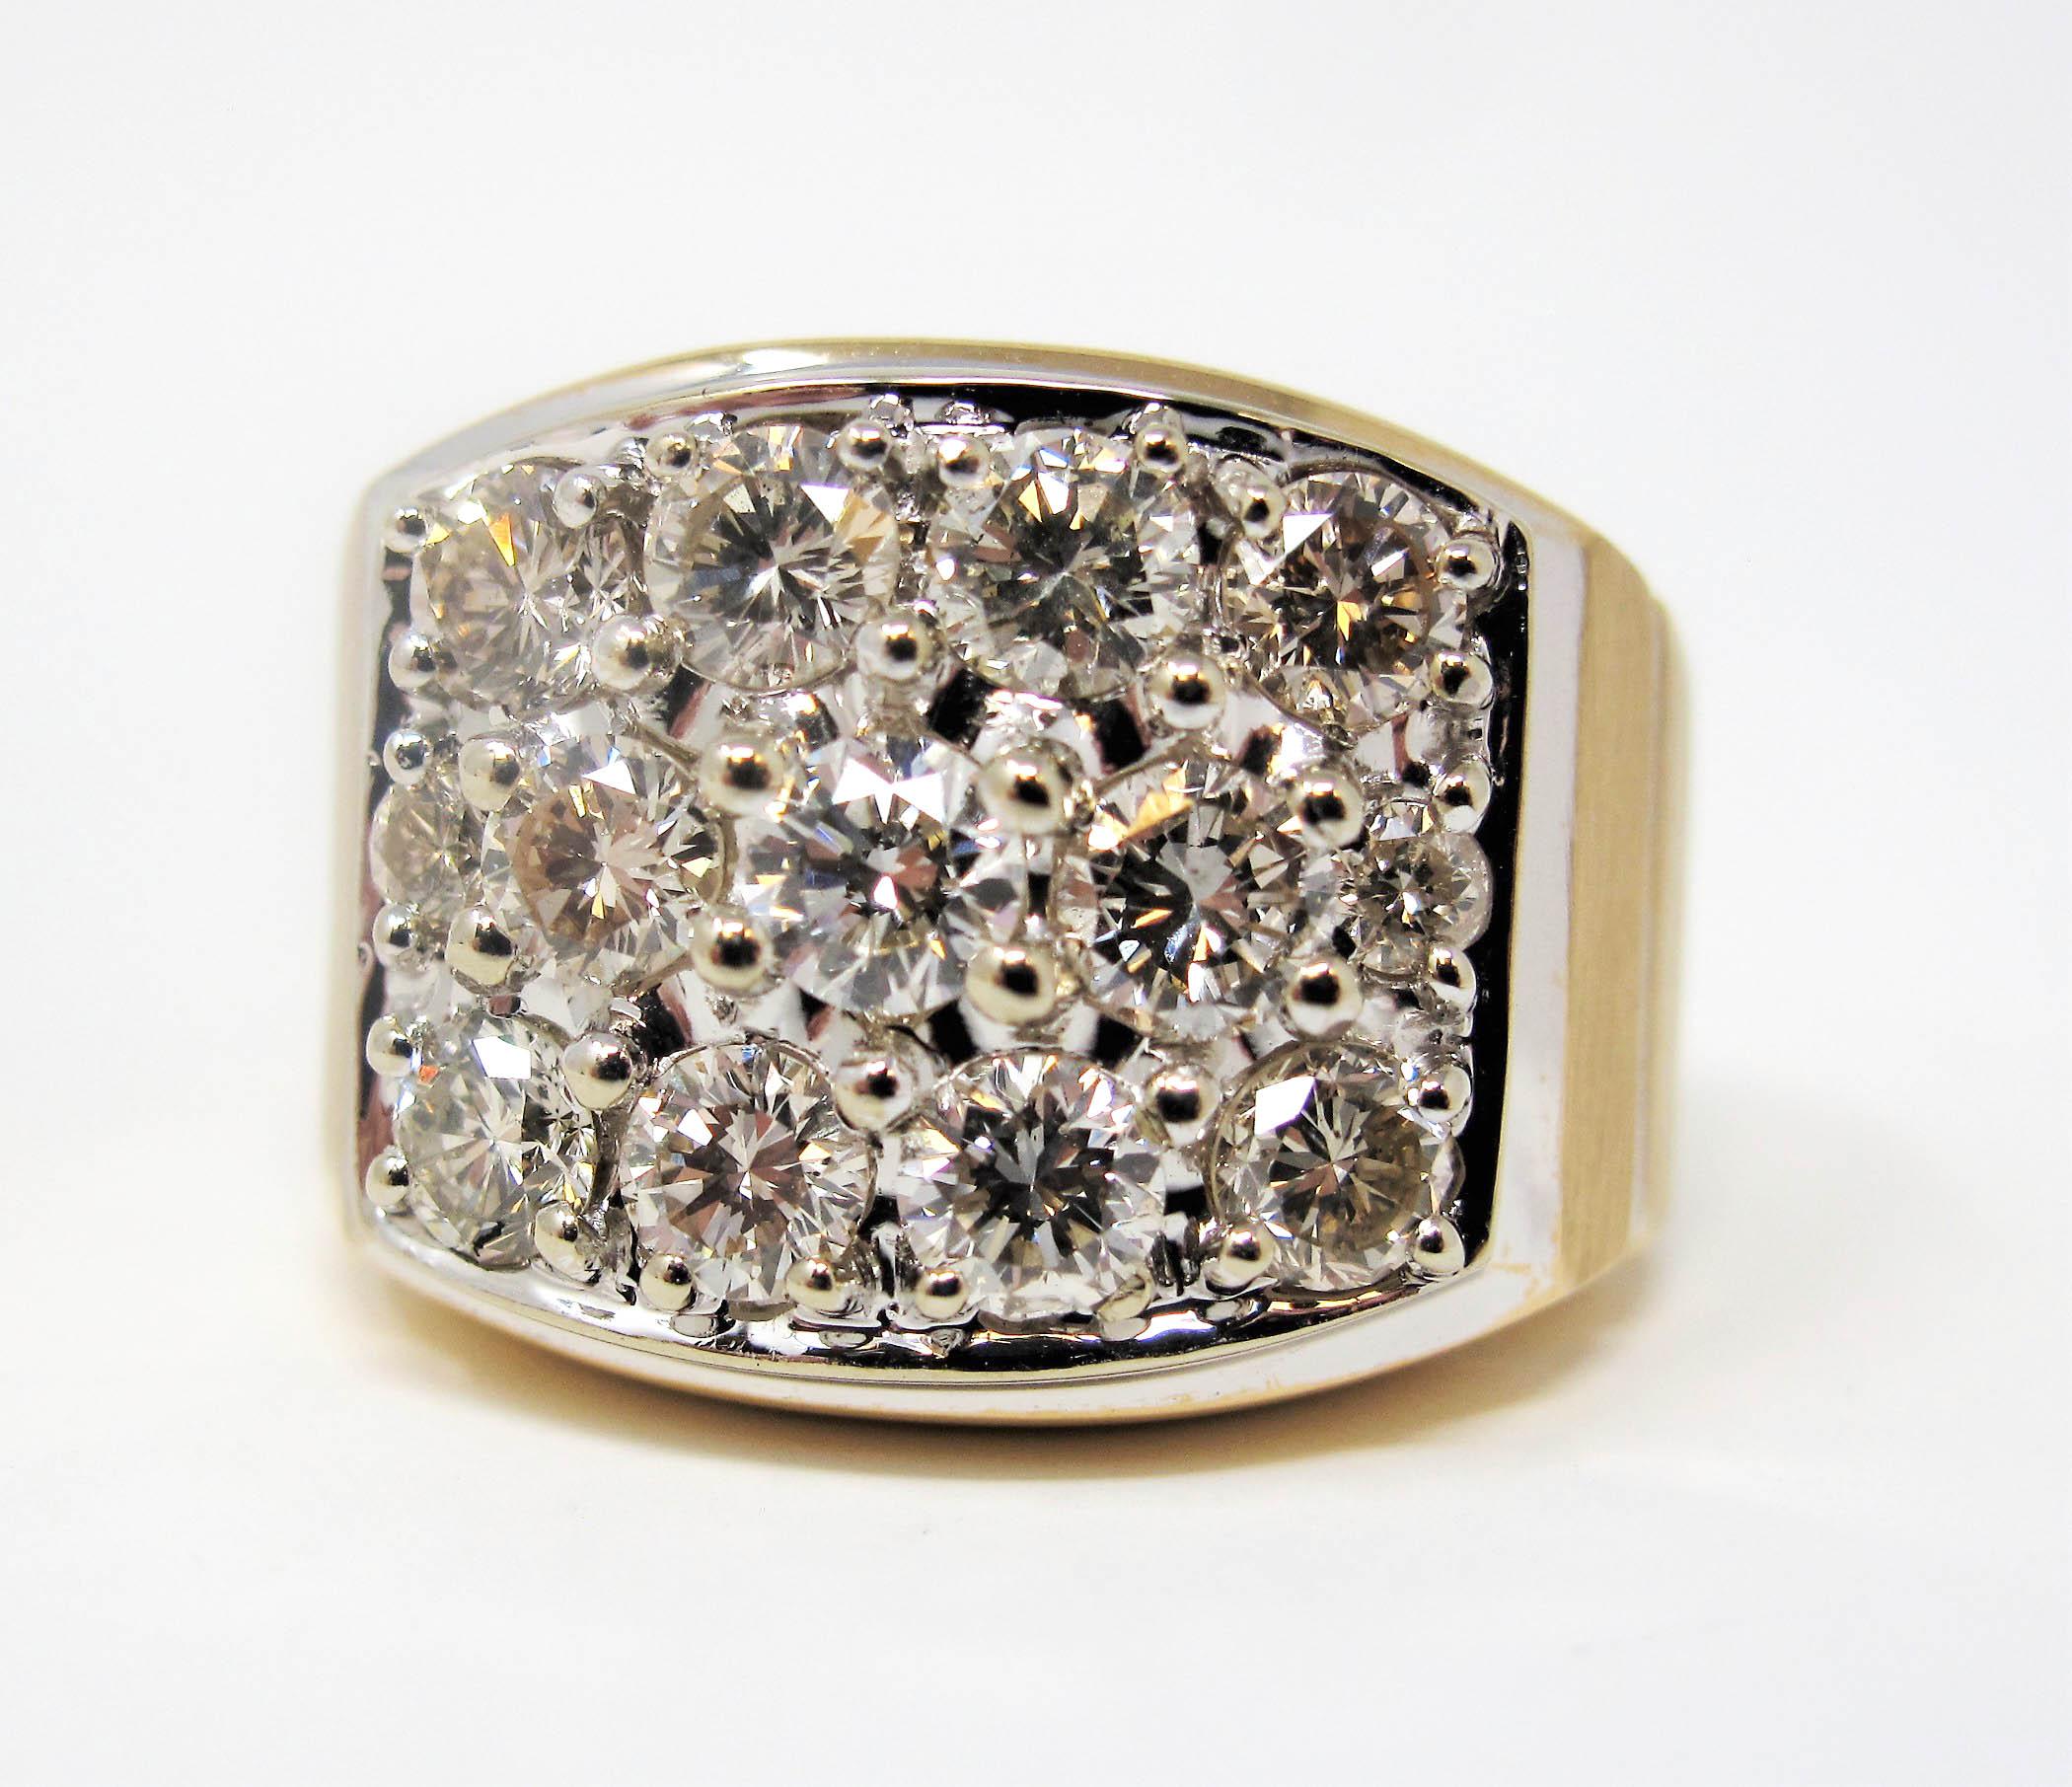 This bold, beautiful diamond band ring is absolutely bursting with sparkle! Featuring 3 horizontal rows of pave diamonds in a rectangular shaped setting, this multi-tone gold ring really fills the finger with dazzling brilliance. 

This incredible